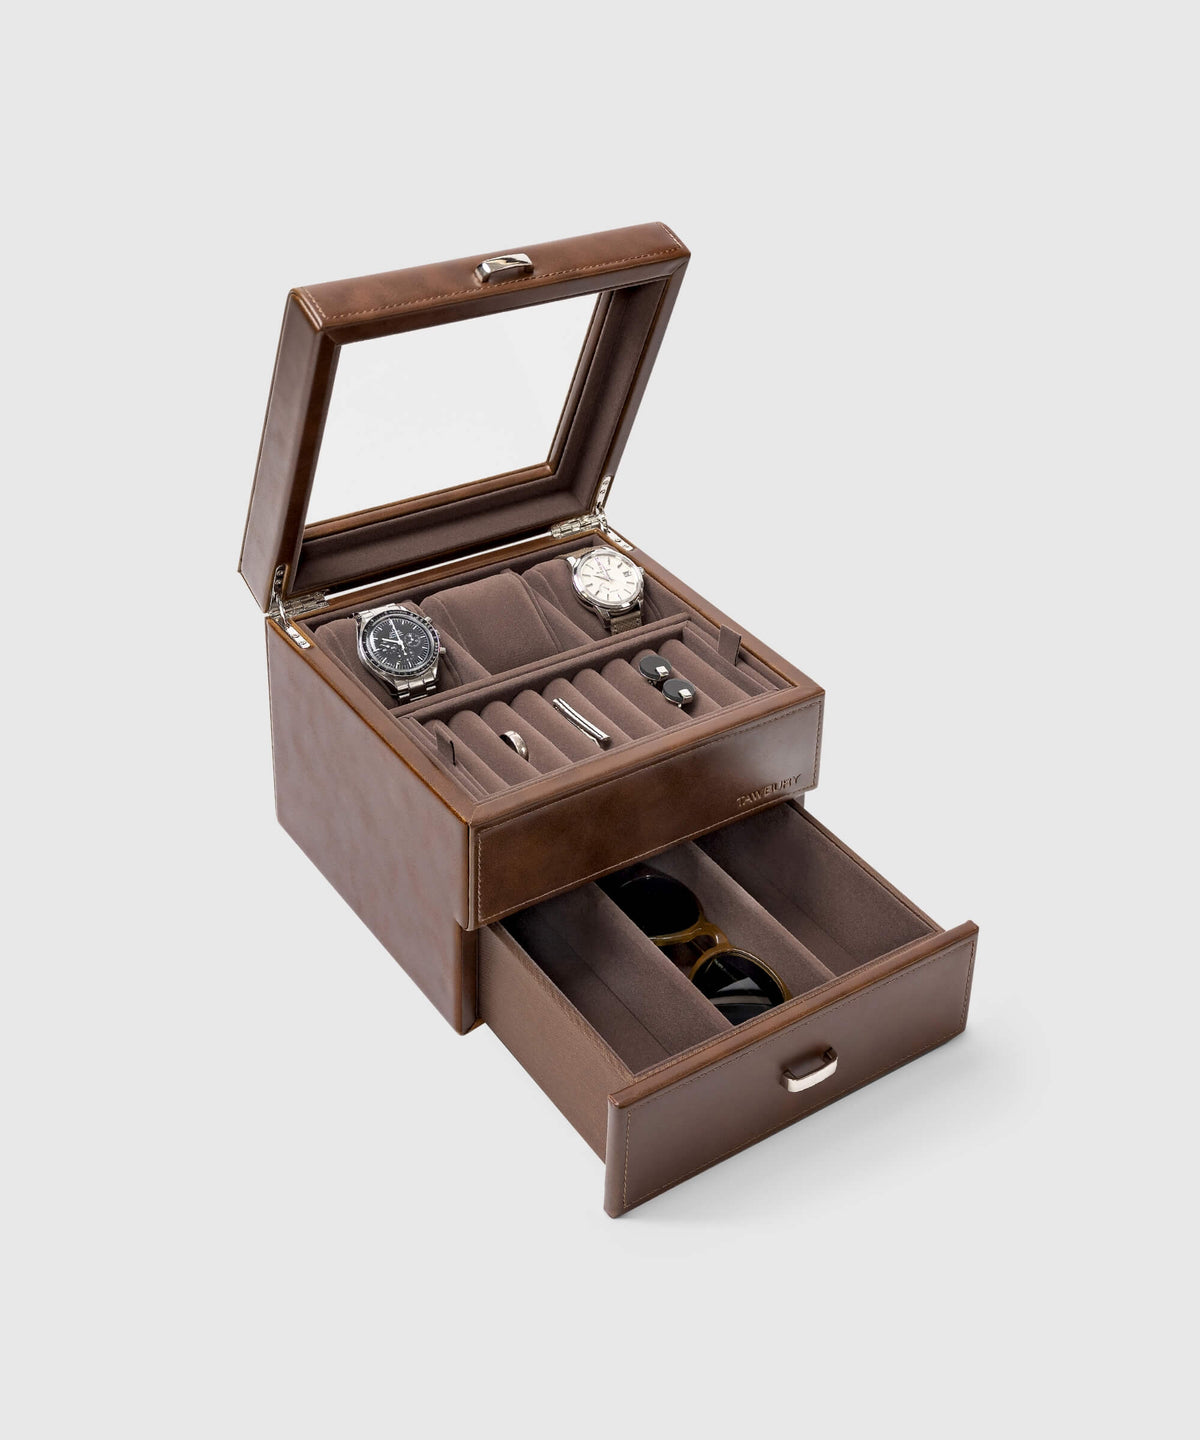 A TAWBURY Bayswater 3 Watch Jewellery Box housing a stylish timepiece, featuring a rich brown leather design.